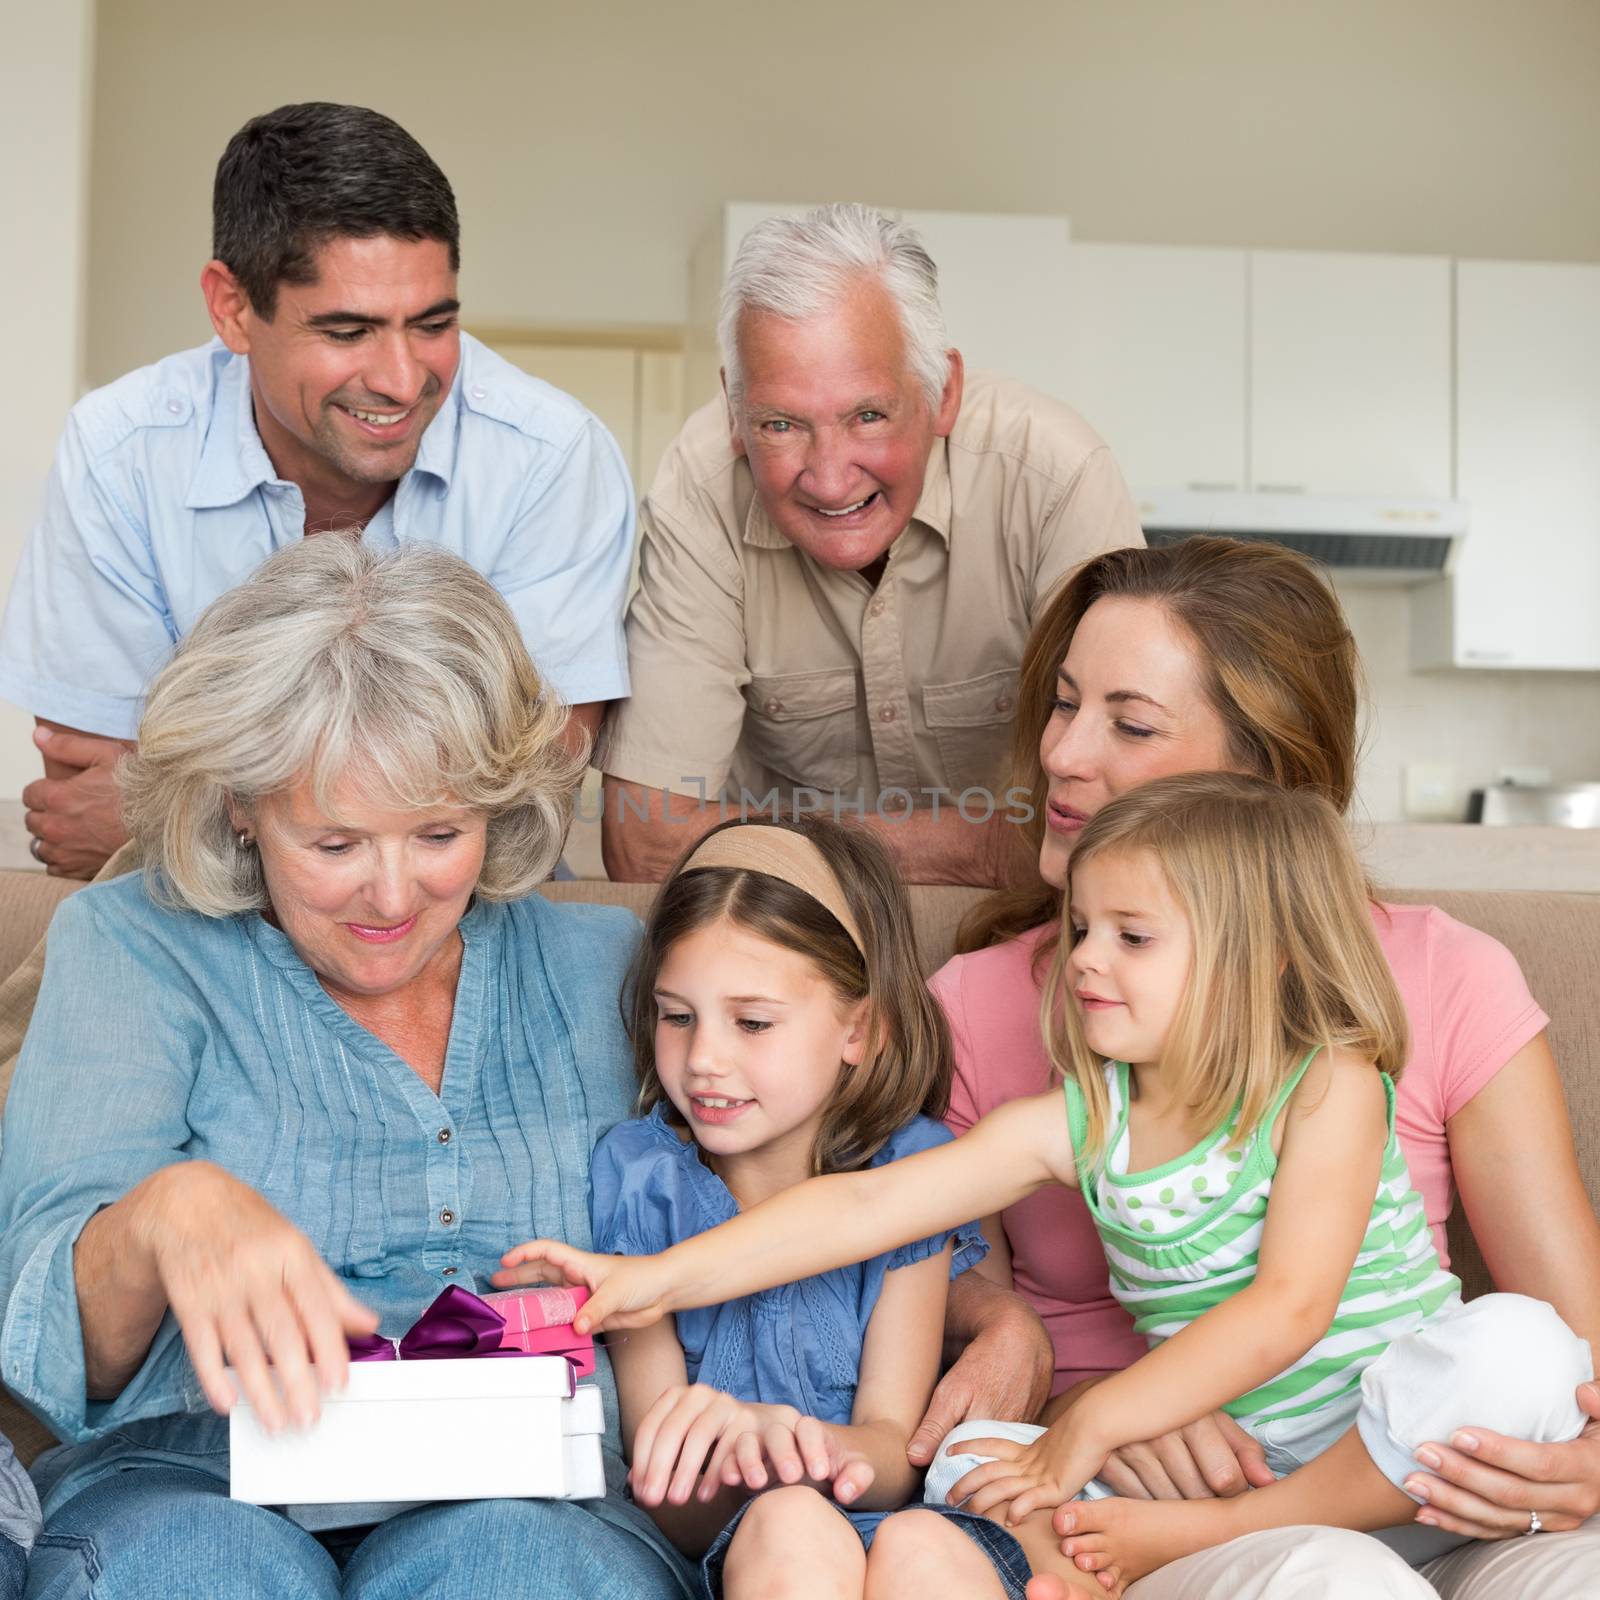 Smiling multigeneration family with gifts in sitting room